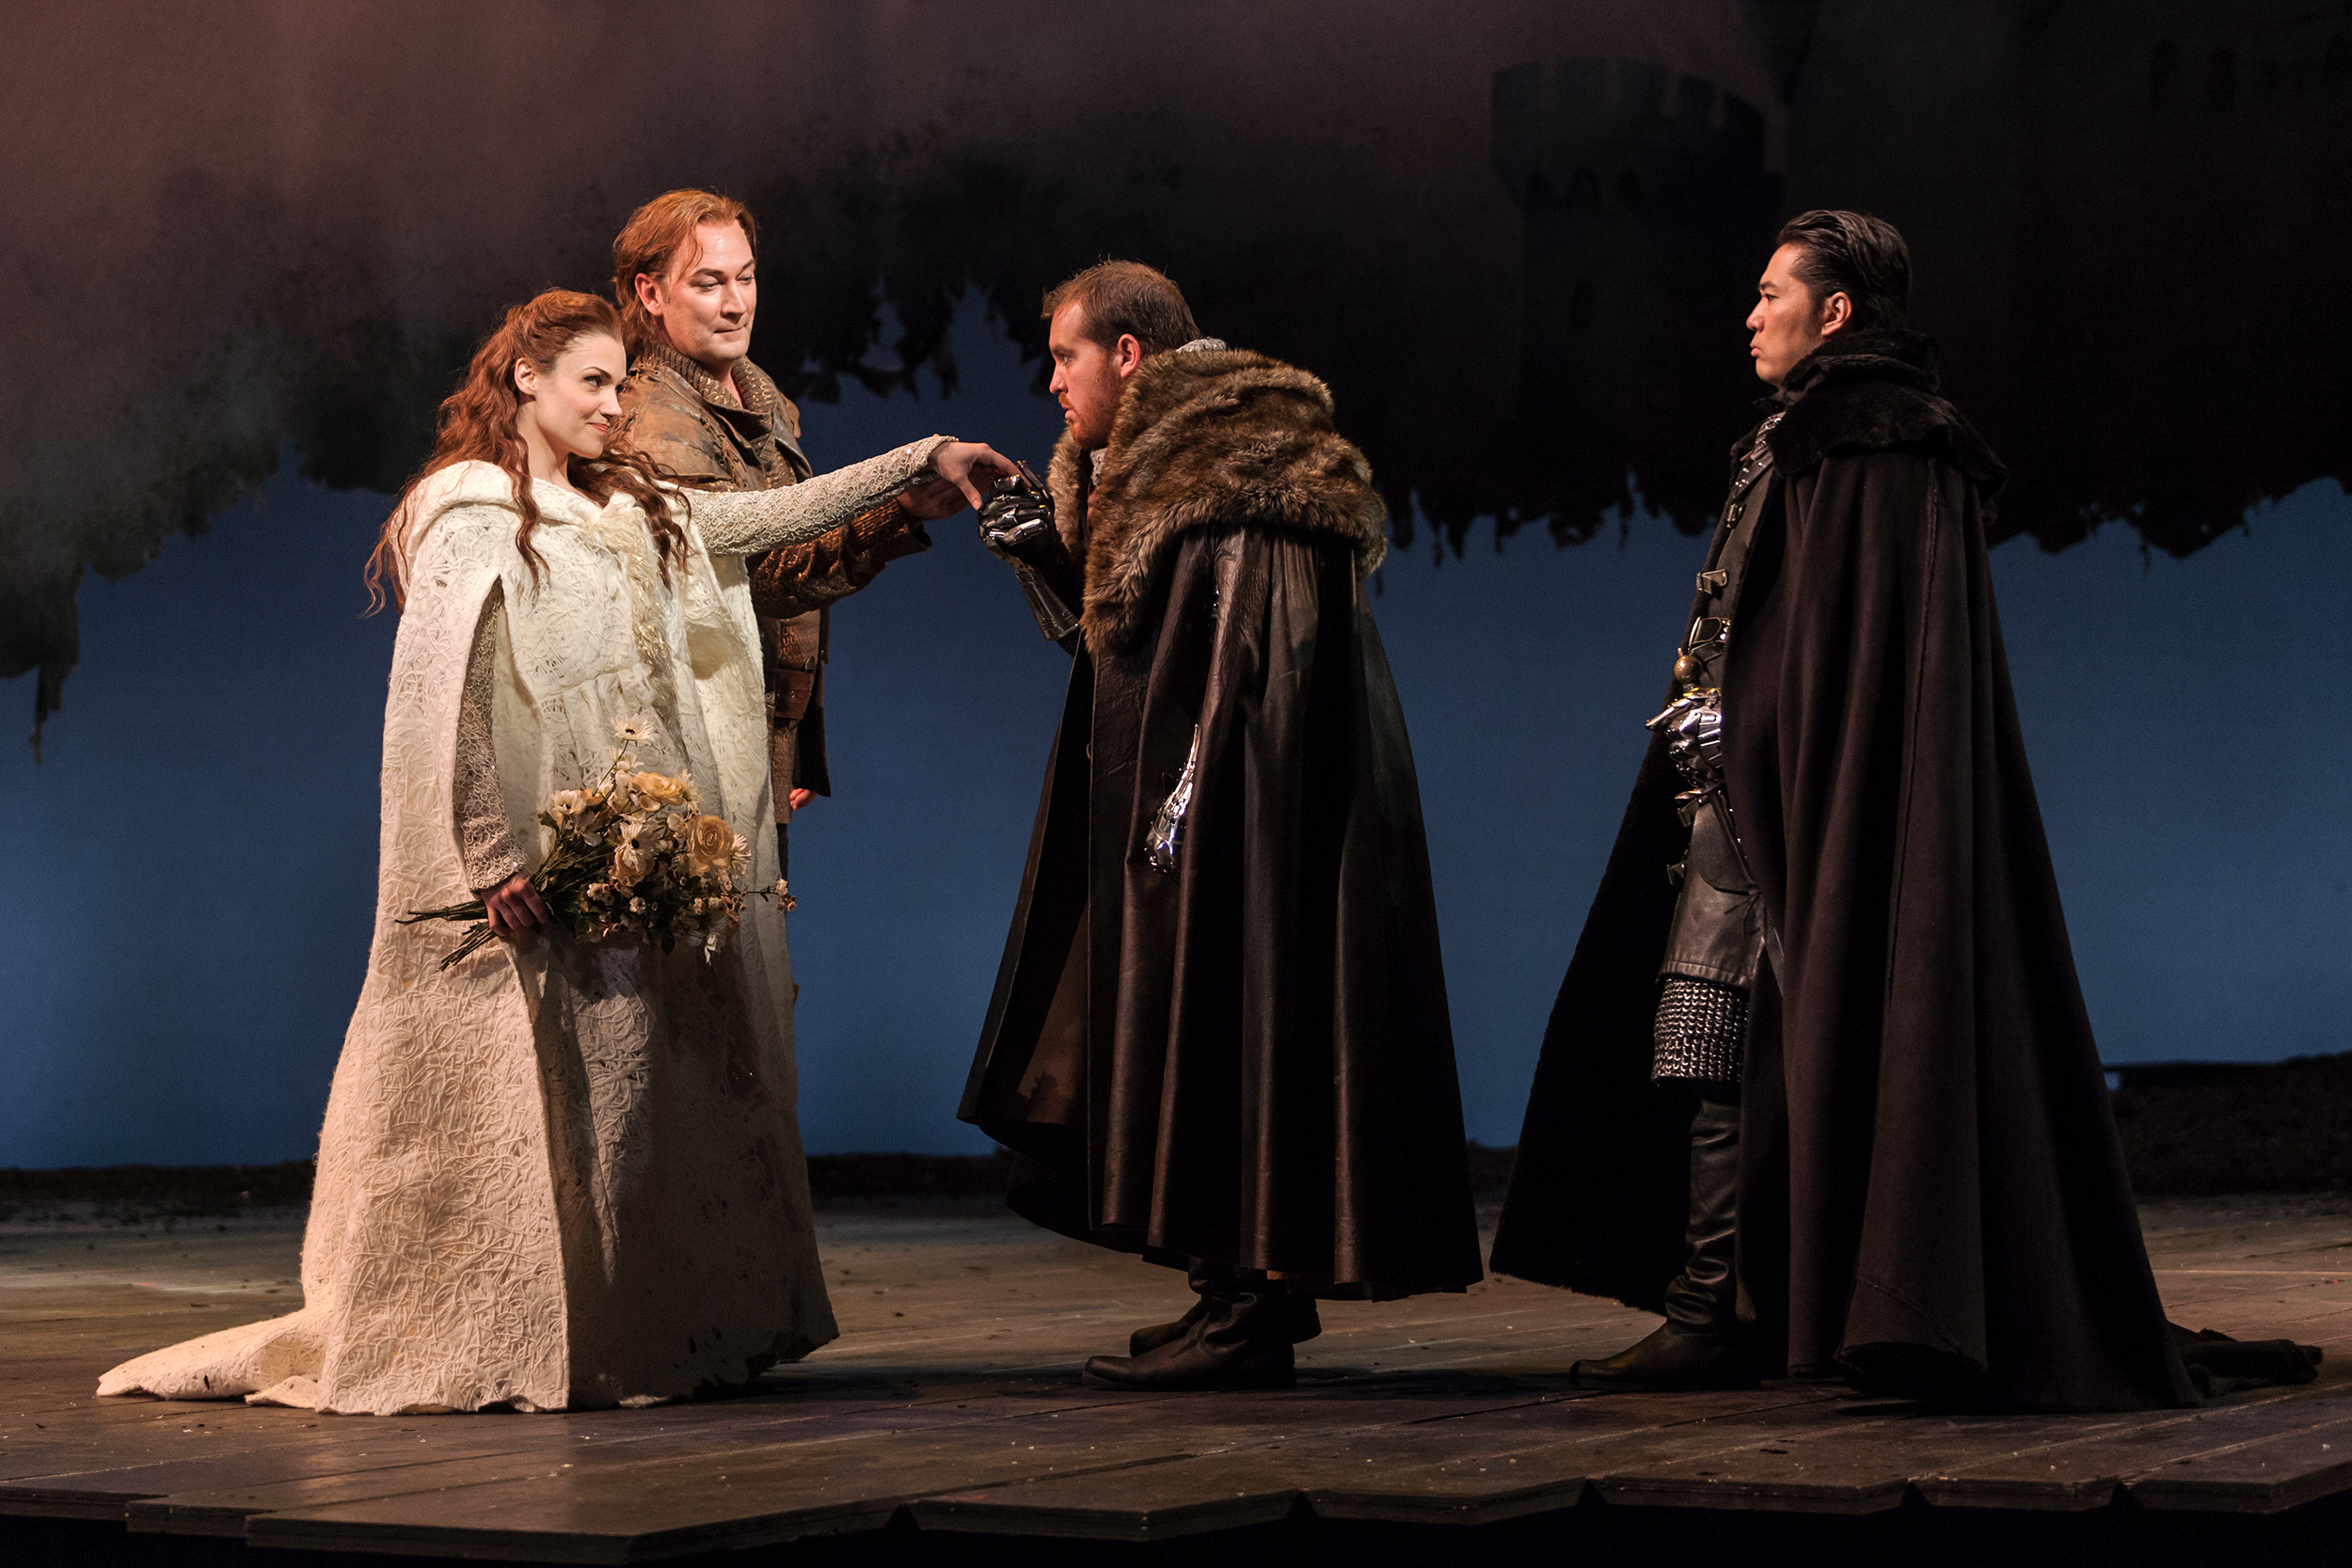  L to R: Andriana Chuchman, David Pittsinger as King Arthur, Clay Hilley as Sir Dinaden and Wayne Hu as Sir Sagramore in The Glimmerglass Festival production of  Camelot . 